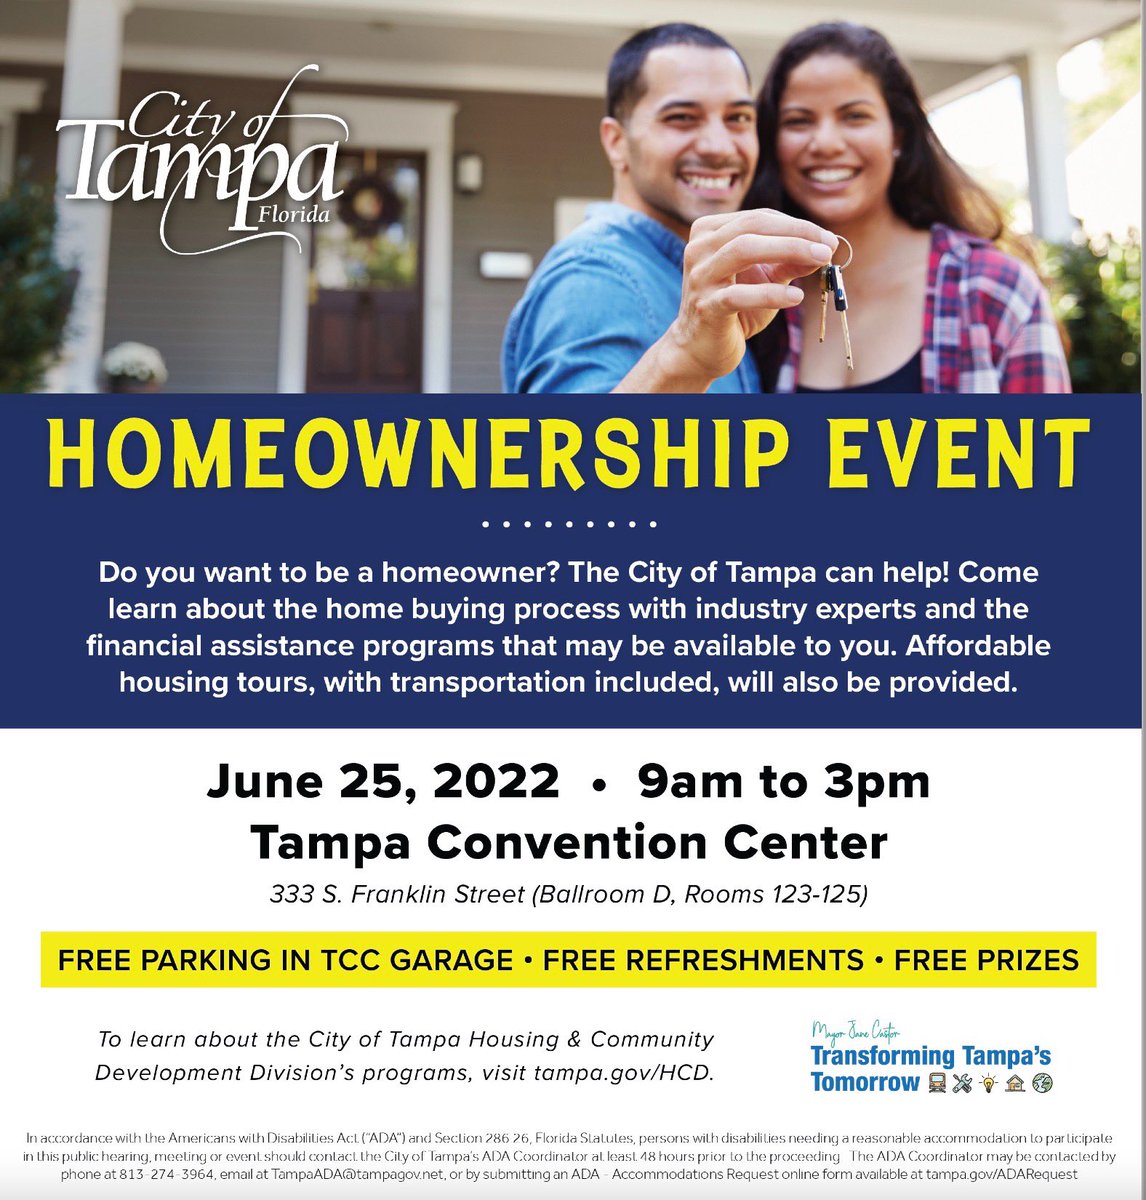 The HCPA will be at this event today, so stop by our vendor table to learn more about property values, the valuable tools on our website, and homestead exemptions! #homeownership #homesteadexemption #saveontaxes #tampa #hillsboroughcounty #tampabay #hcpa